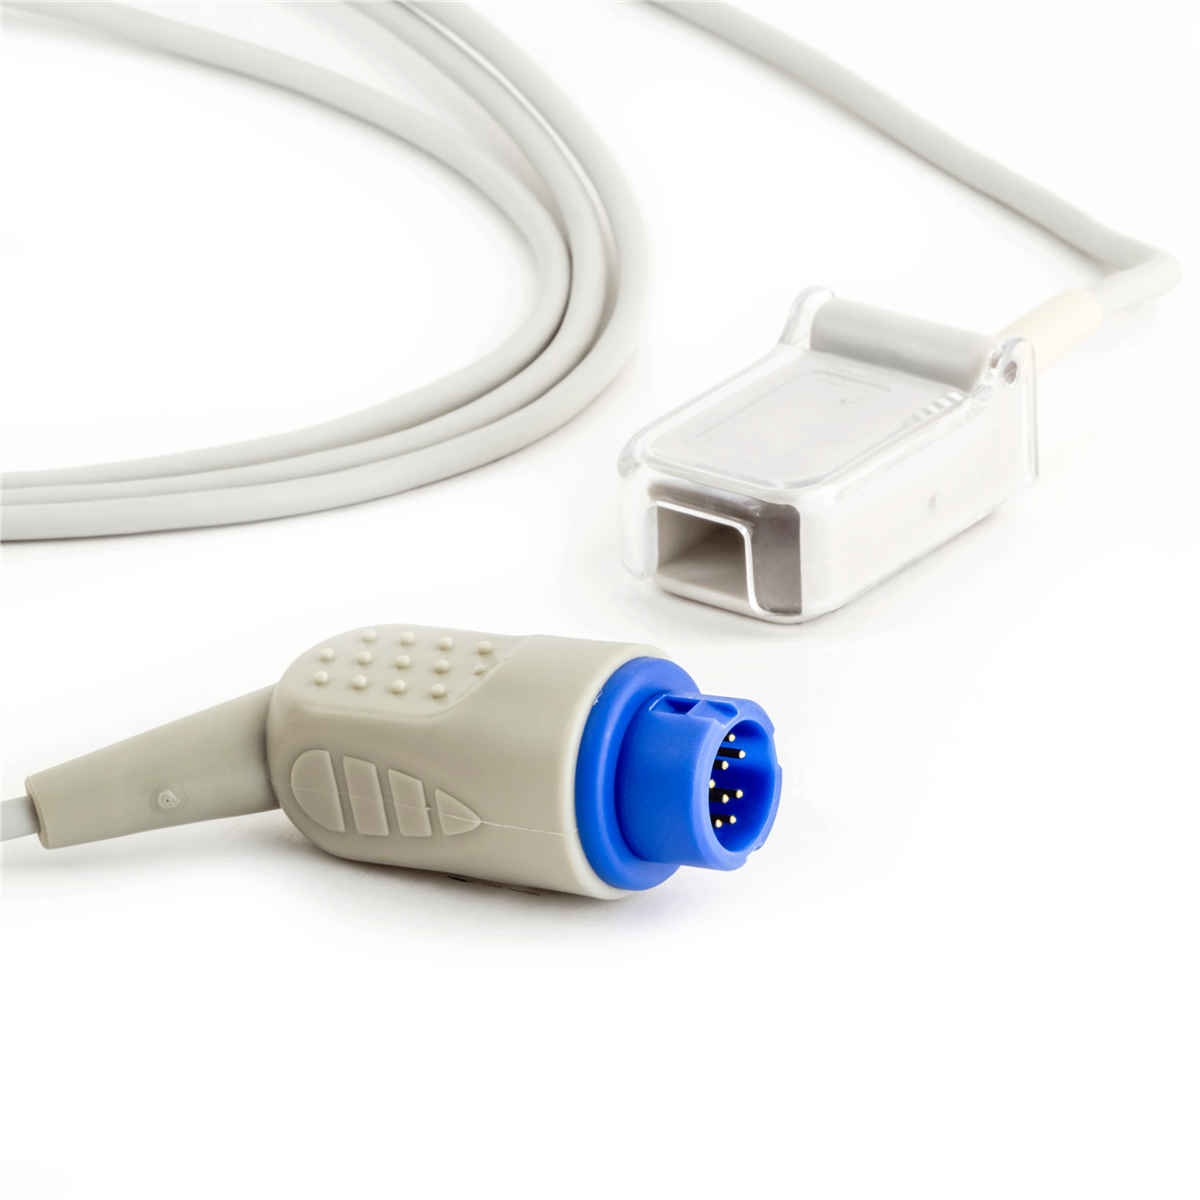 Mindray / Datascope SpO2 7FT/2.2M Patient Extension Adapter Cable DB9 9 Pin to 12 Pin Connector 0515-30-11221 Comparable